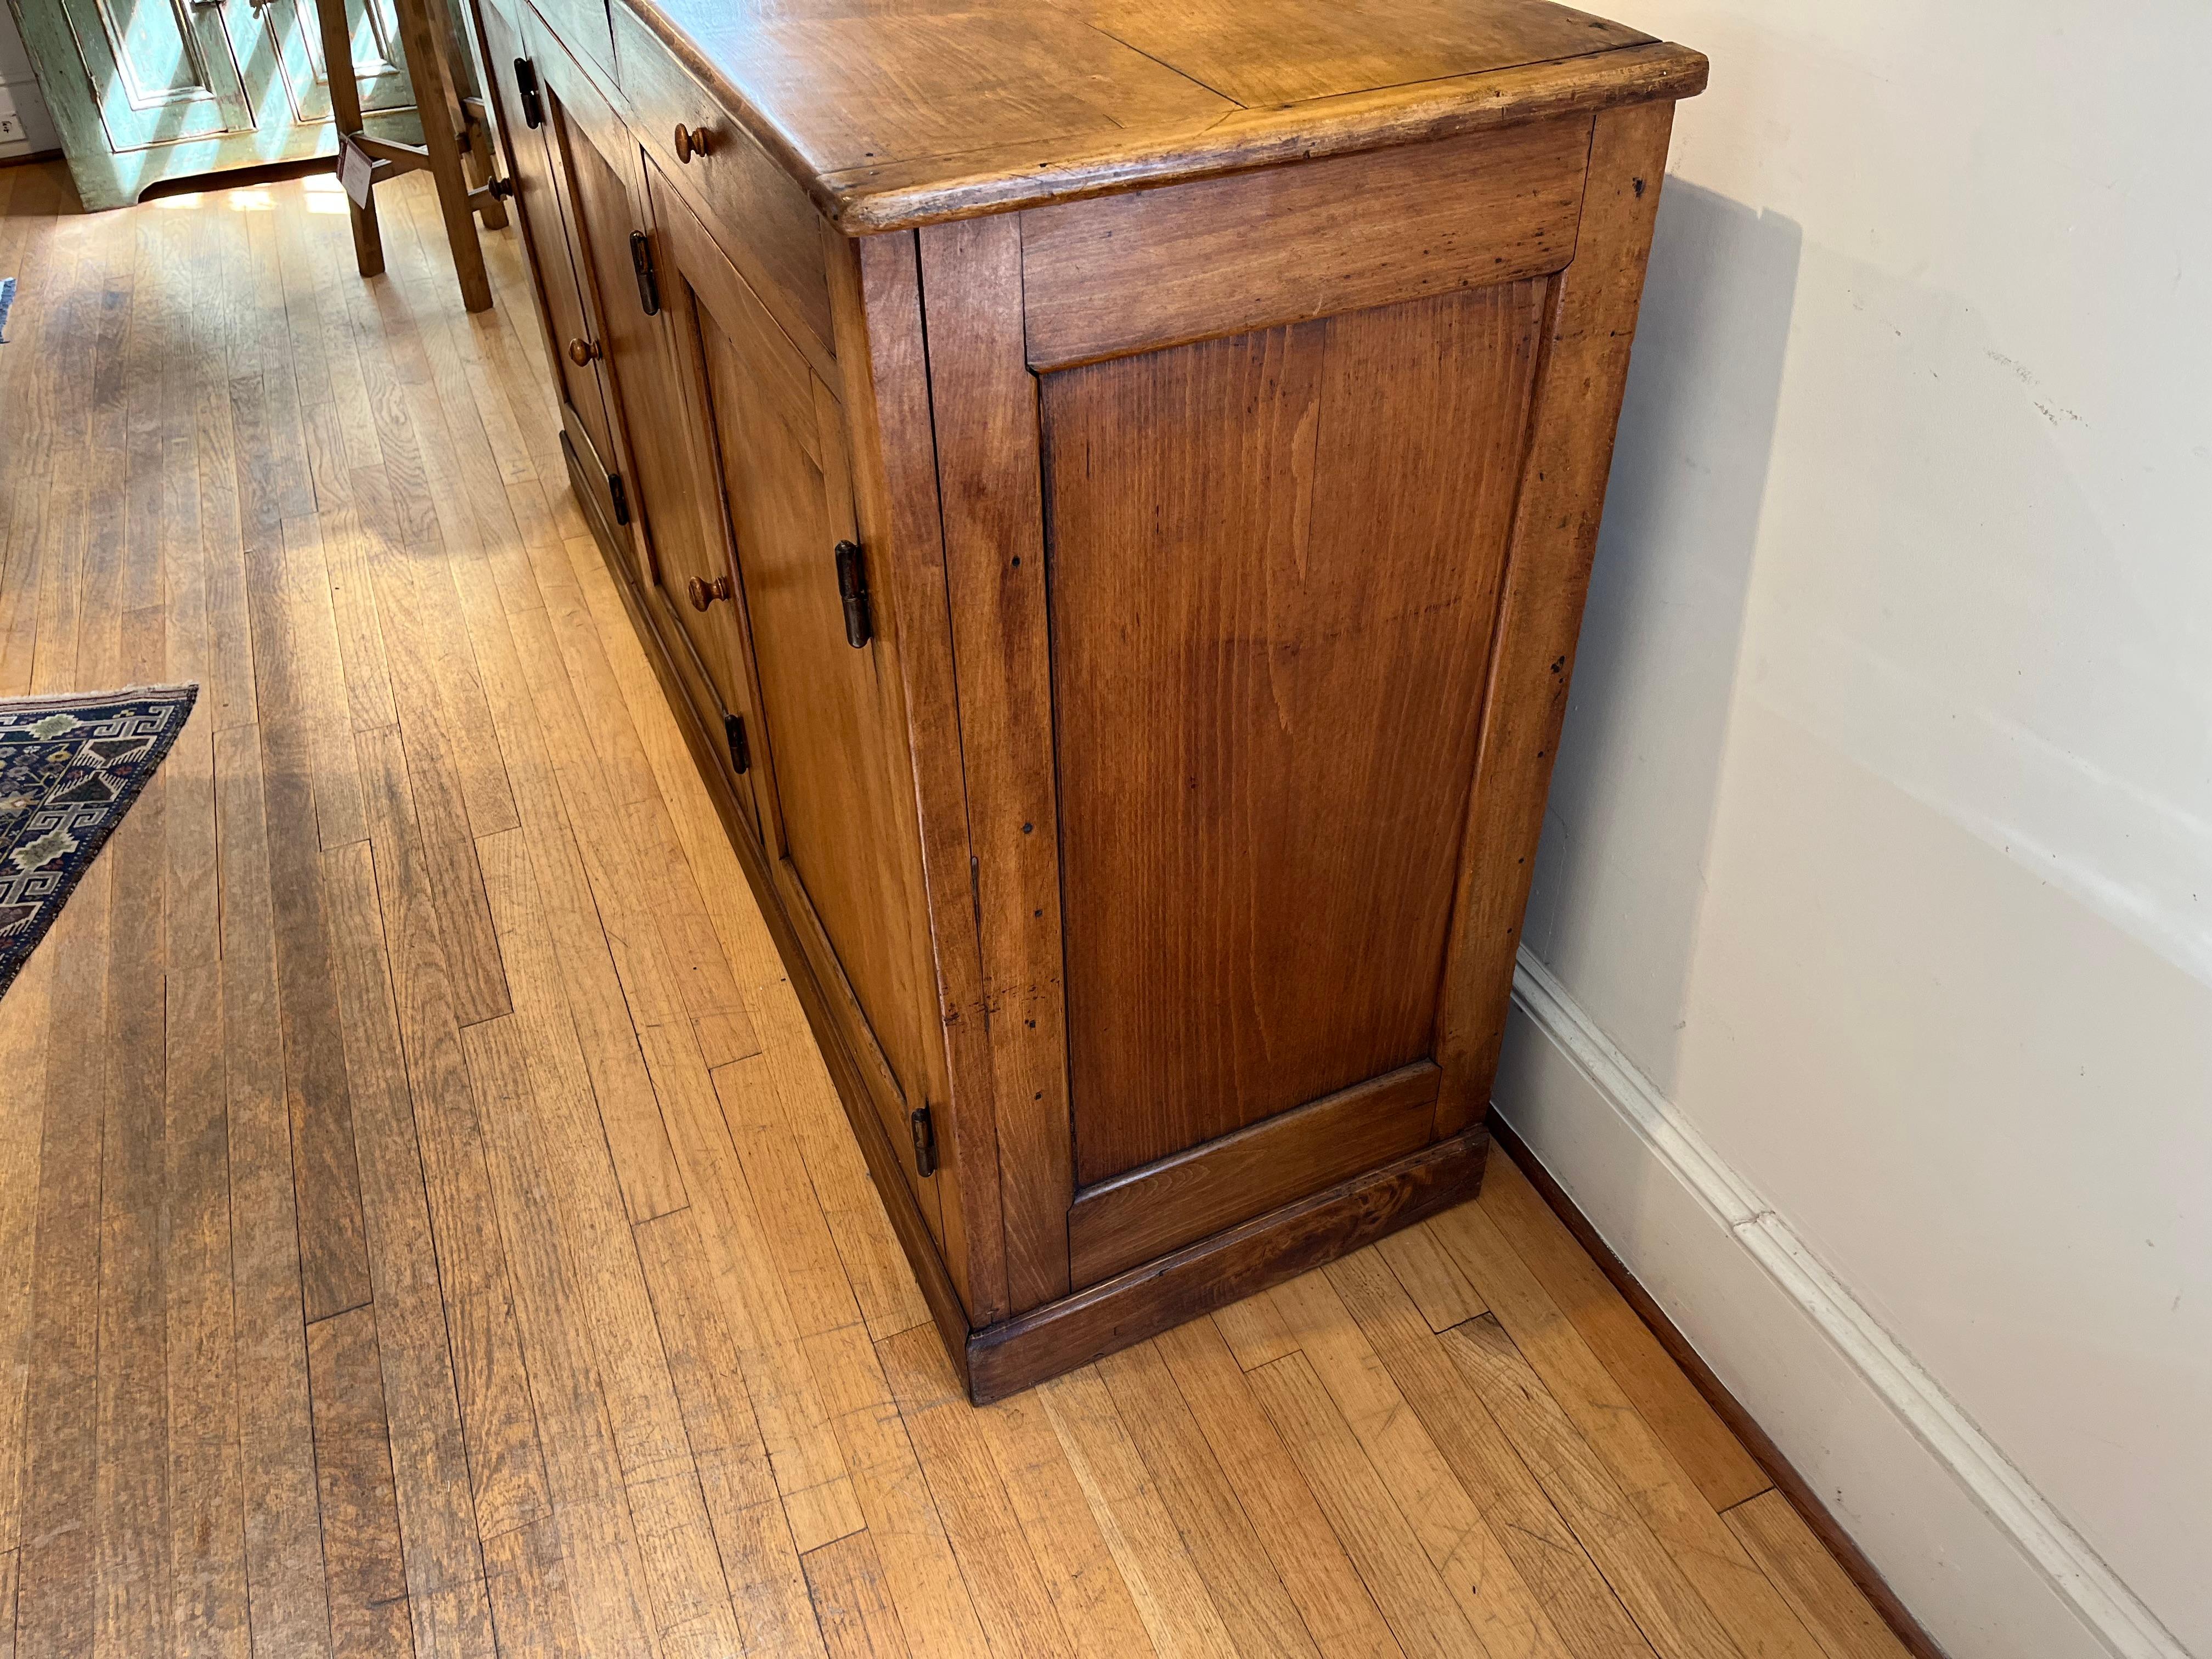 Circa 1840 - the patina will get your attention right away. It has 3 doors and 3 drawers with original hardware. there is plenty of storage room. The color stain is simply soft and wonderful.